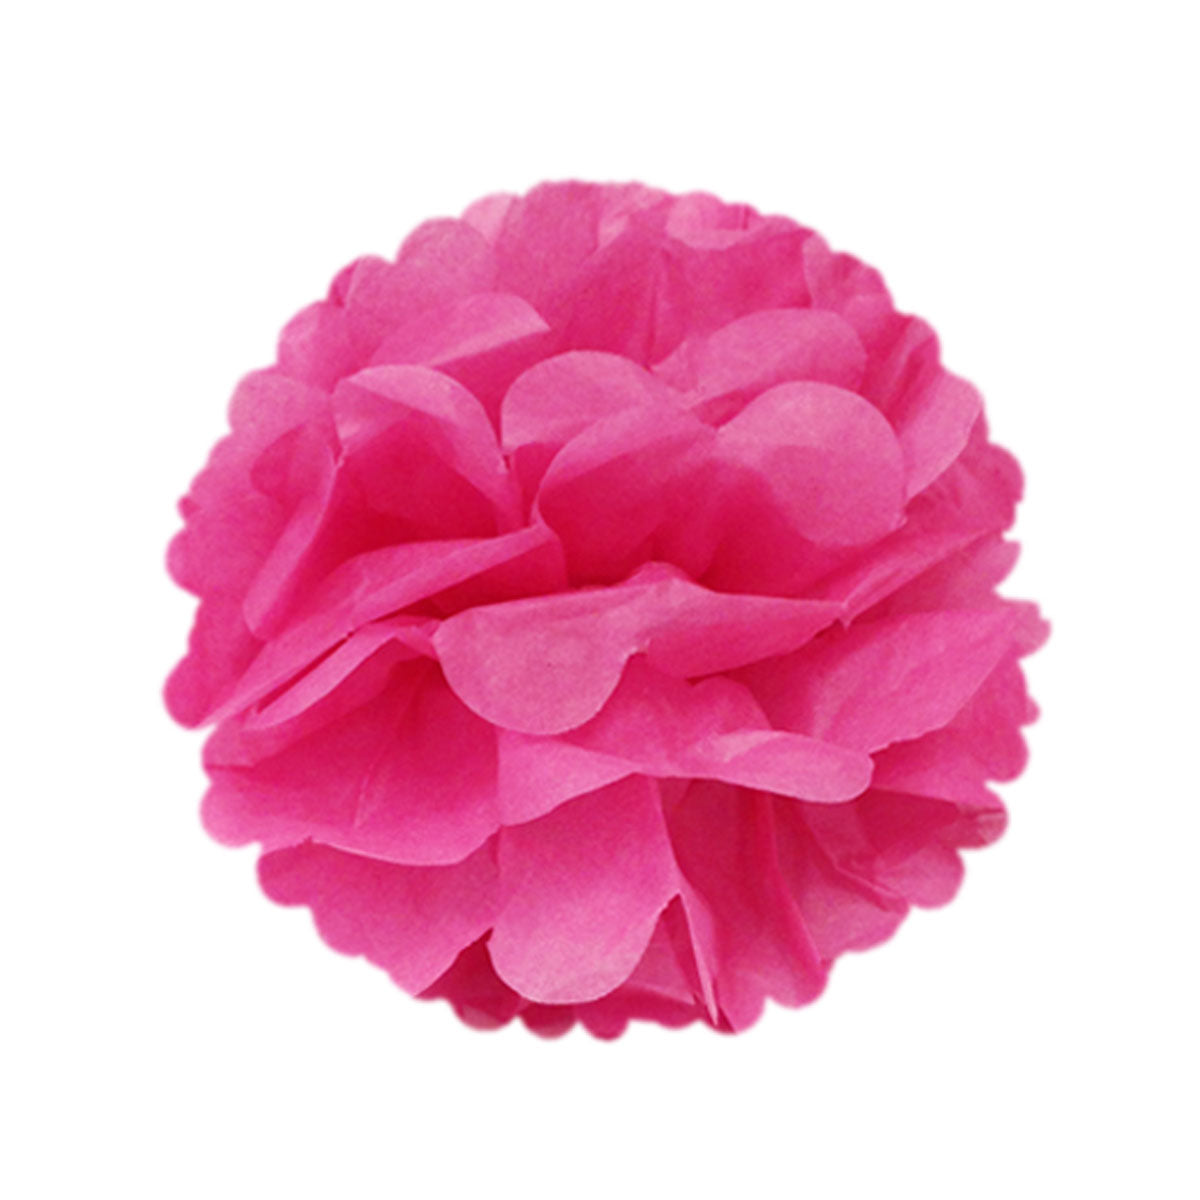 Wrapables 8" Set of 5 Tissue Pom Poms Party Decorations